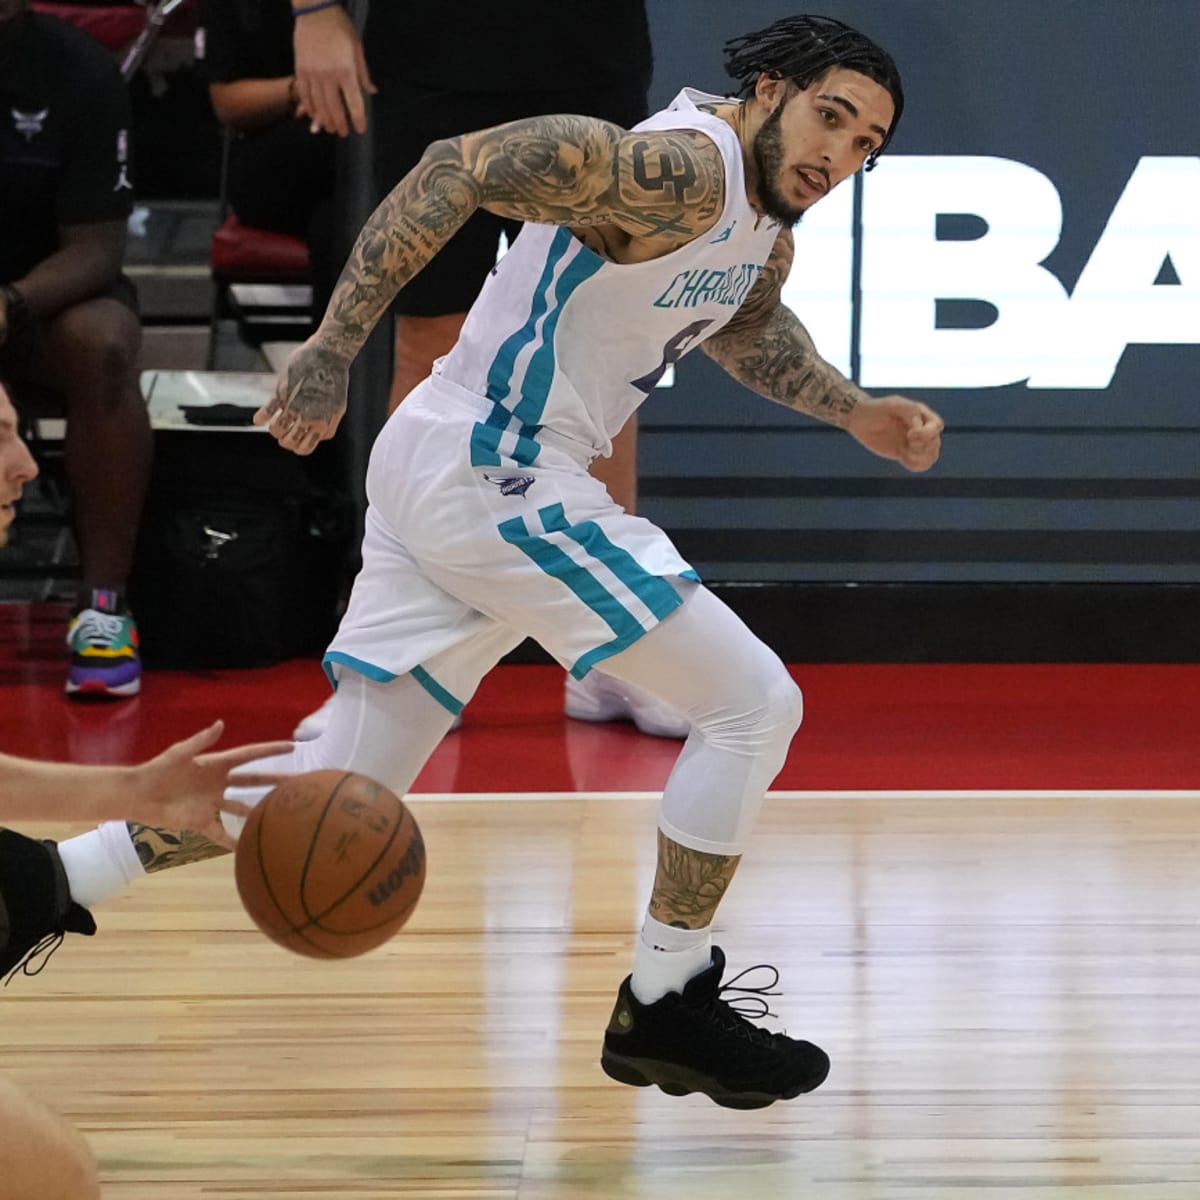 How to watch today's Bulls vs Hornets NBA game: Livestream, TV coverage,  kickoff time & radio station